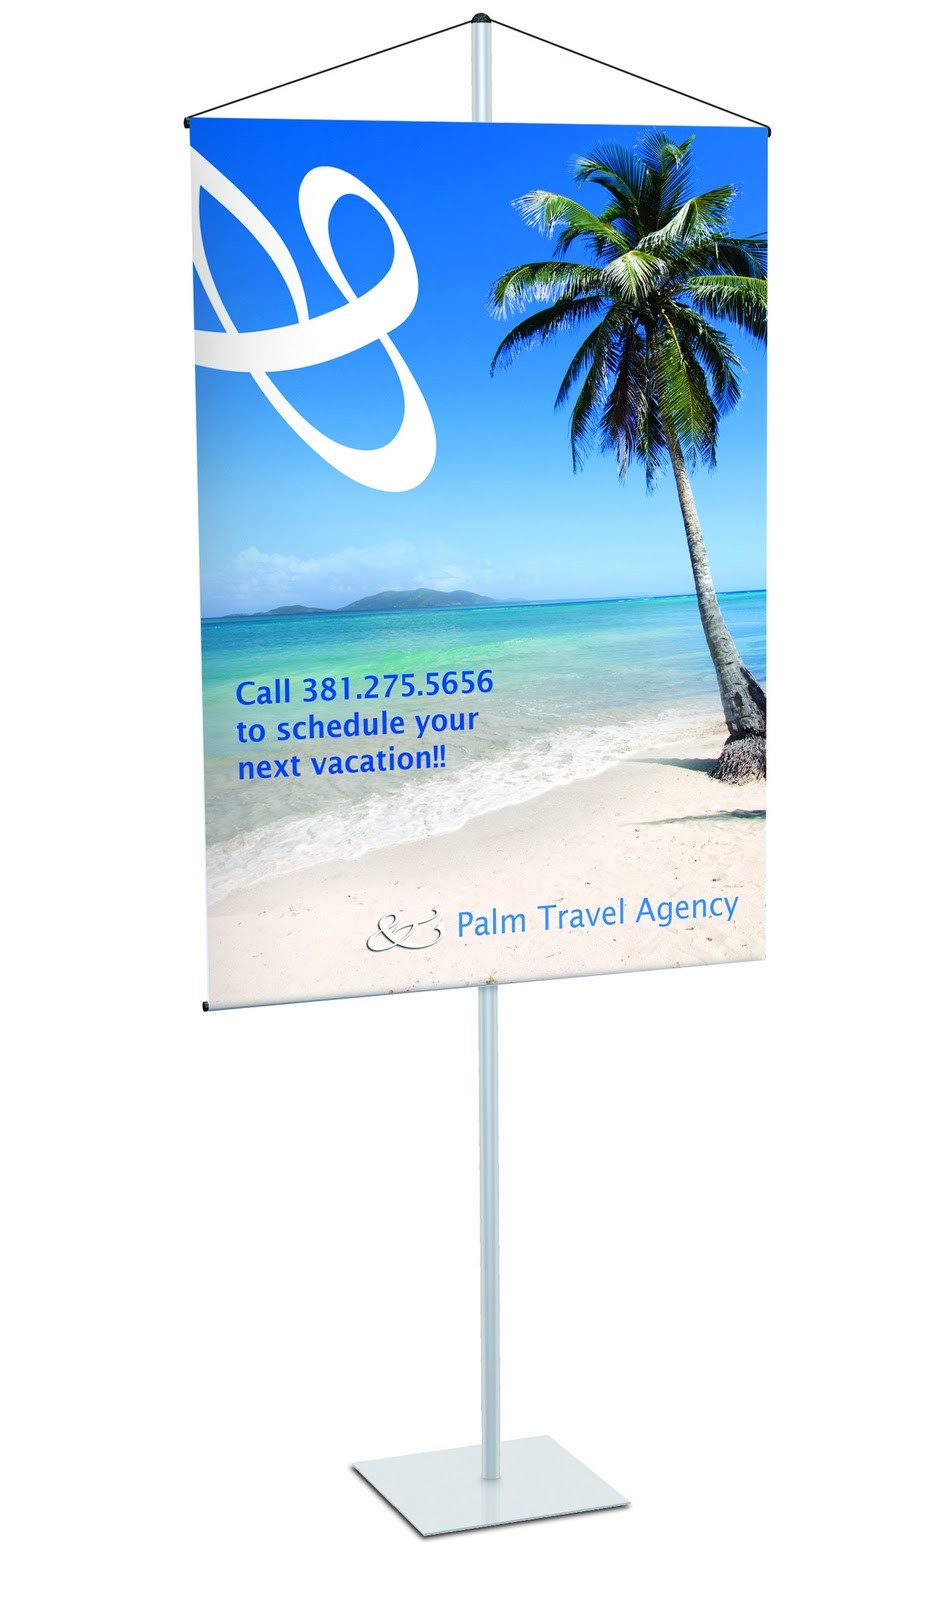 Budget Banner Stand 30" x 48" (on sales)